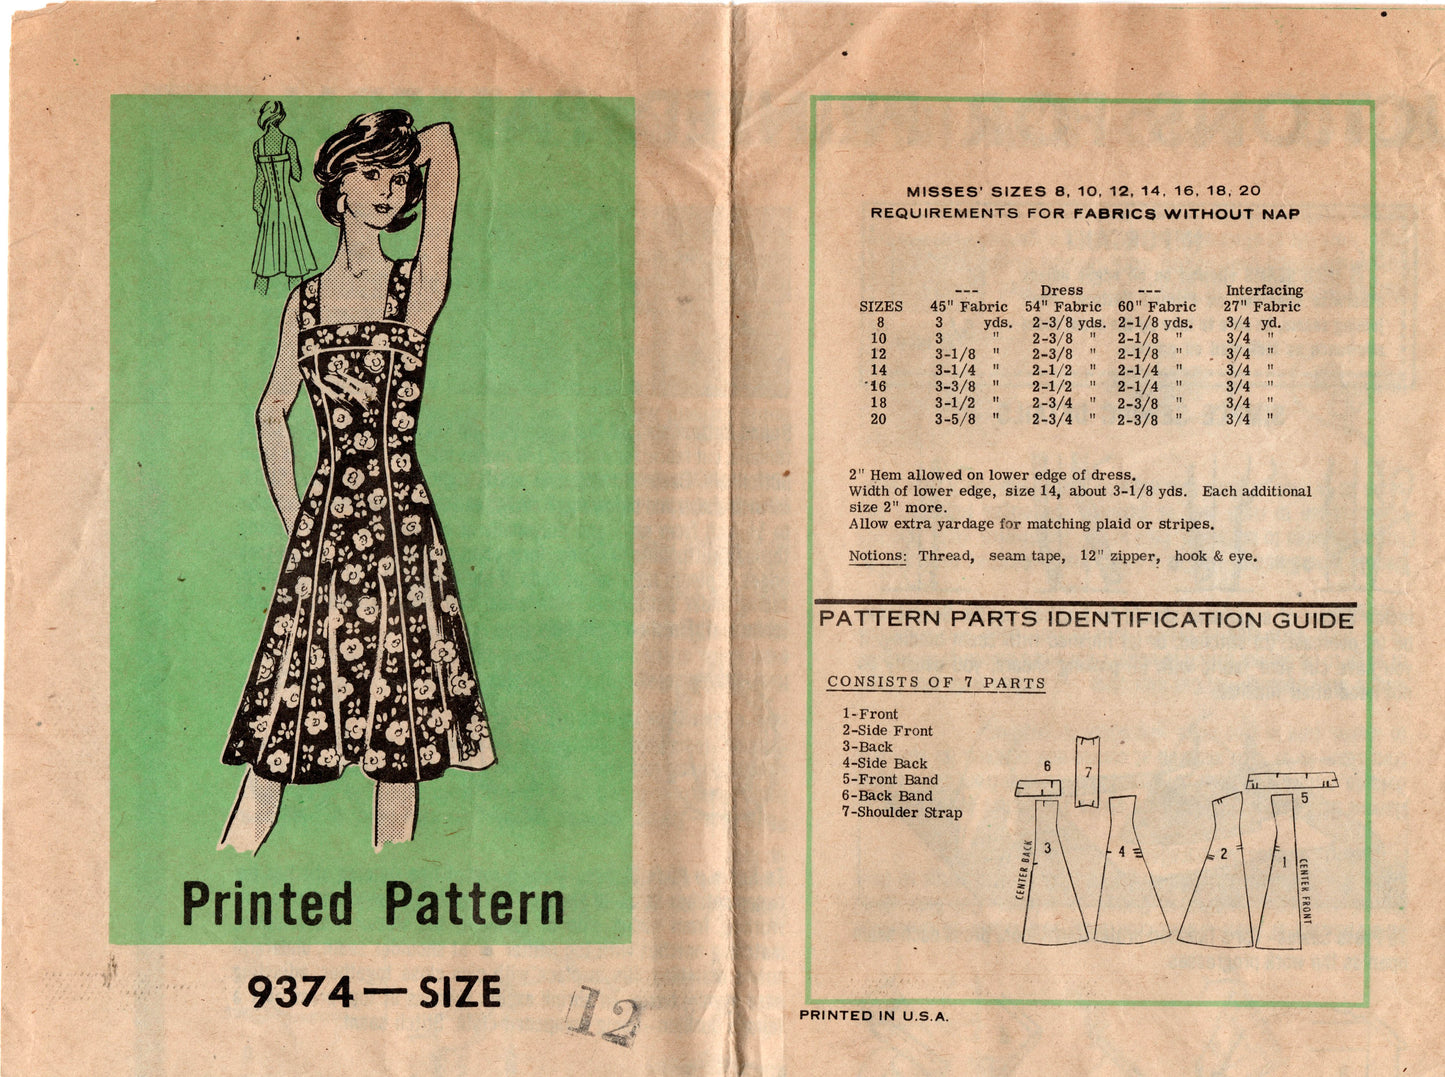 Mail Order 9374 Womens Sundress 1970s Vintage Sewing Pattern Size 12 Bust 34 Inches